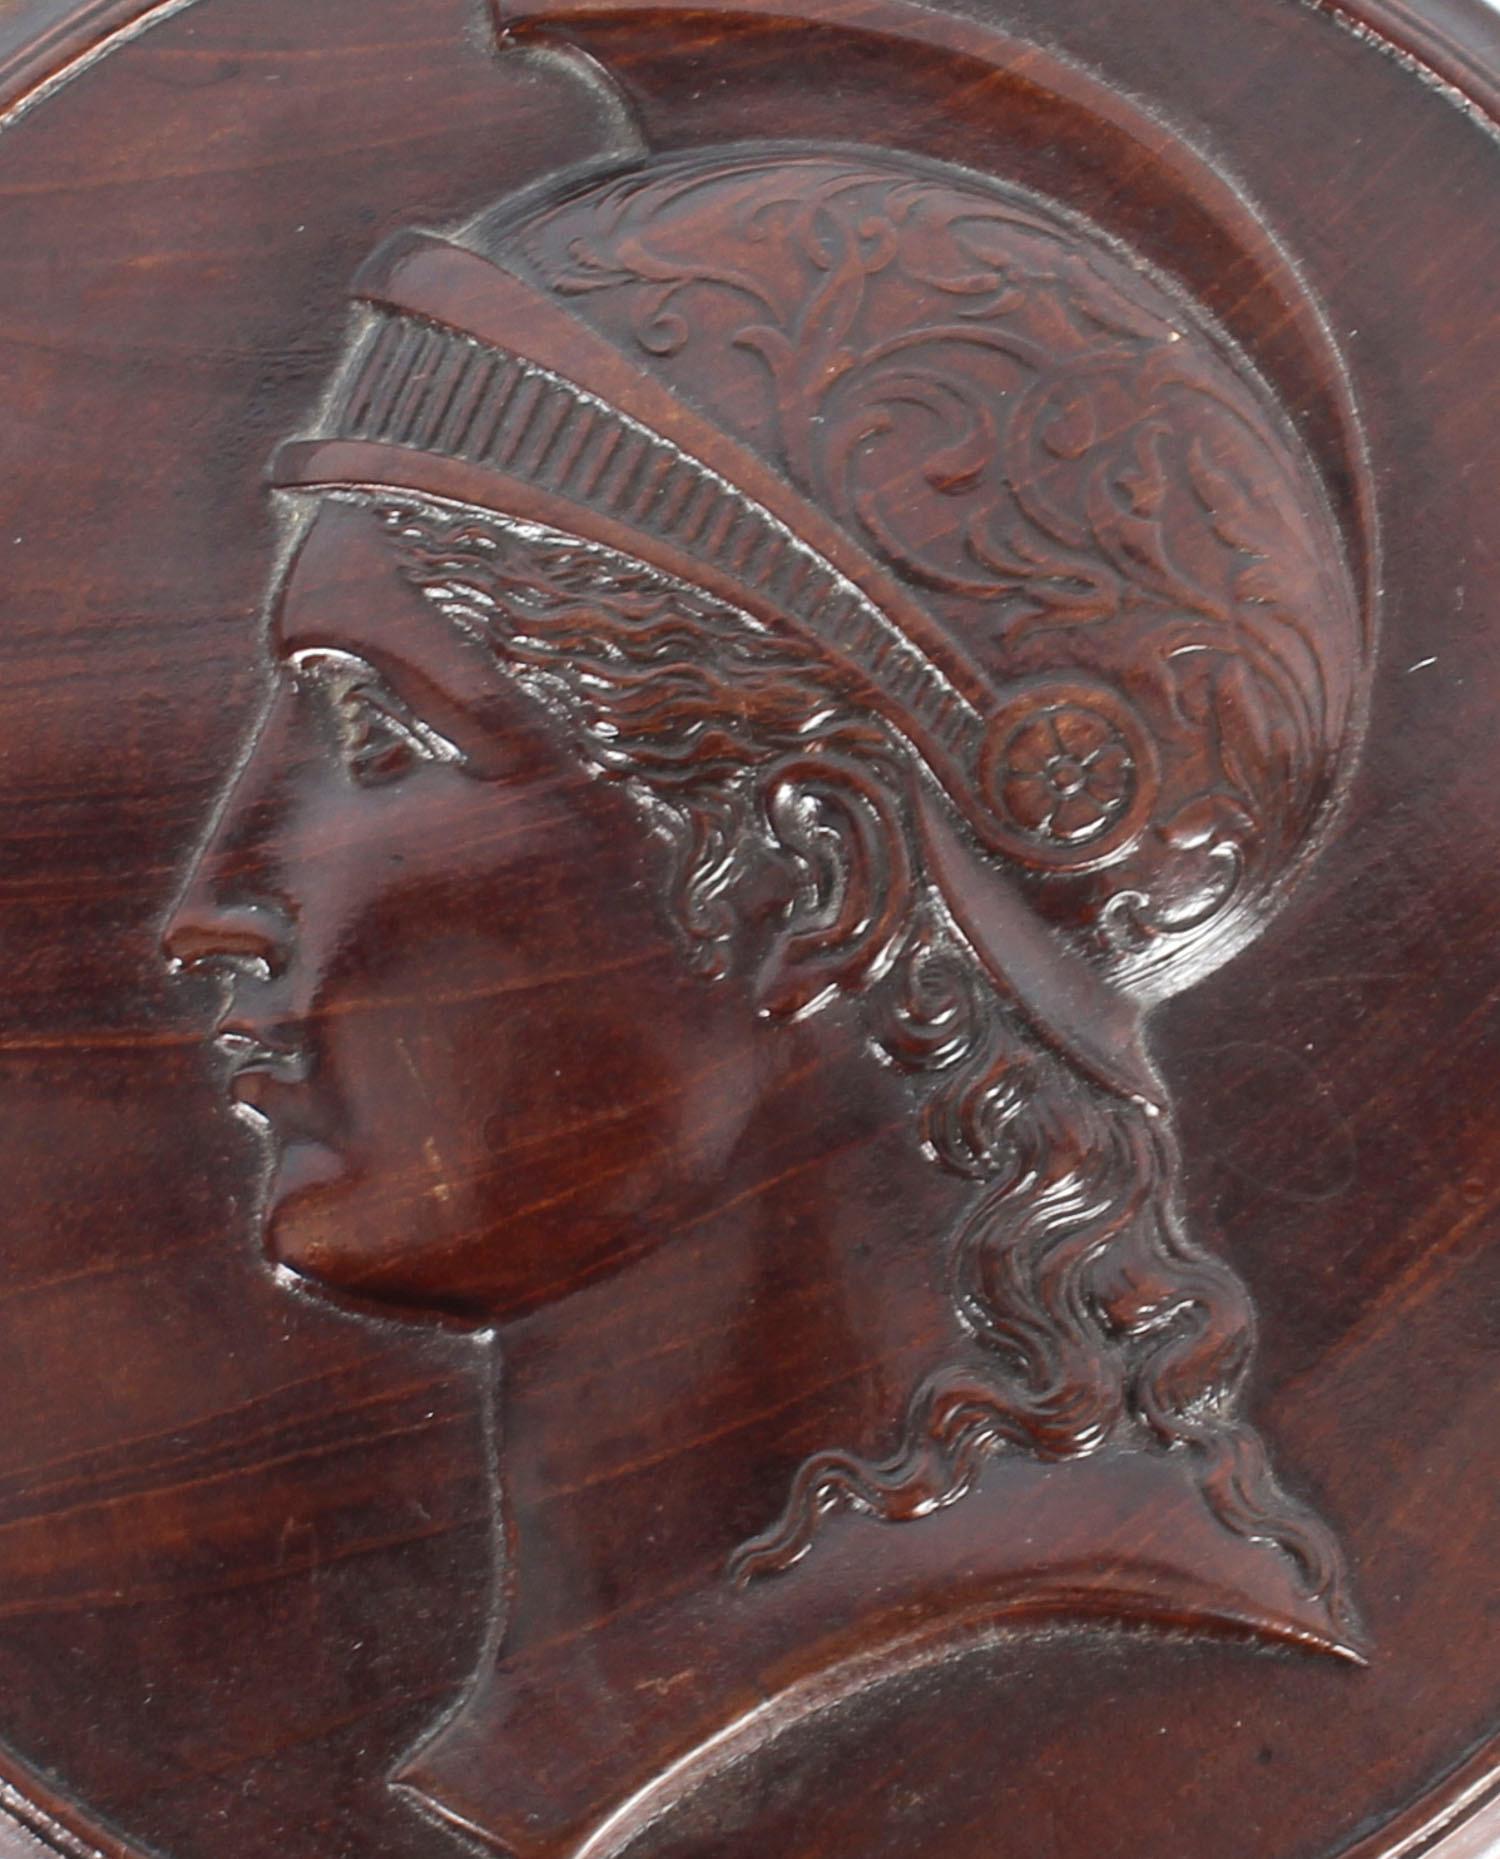 This beautiful Italian Grand Tour mahogany roundel plaque profile bust depicting Minerva dating from the mid-19th century.
 
The sensitively carved plaque depicts the profile of Minerva, the Roman goddess of wisdom and strategic warfare, in high